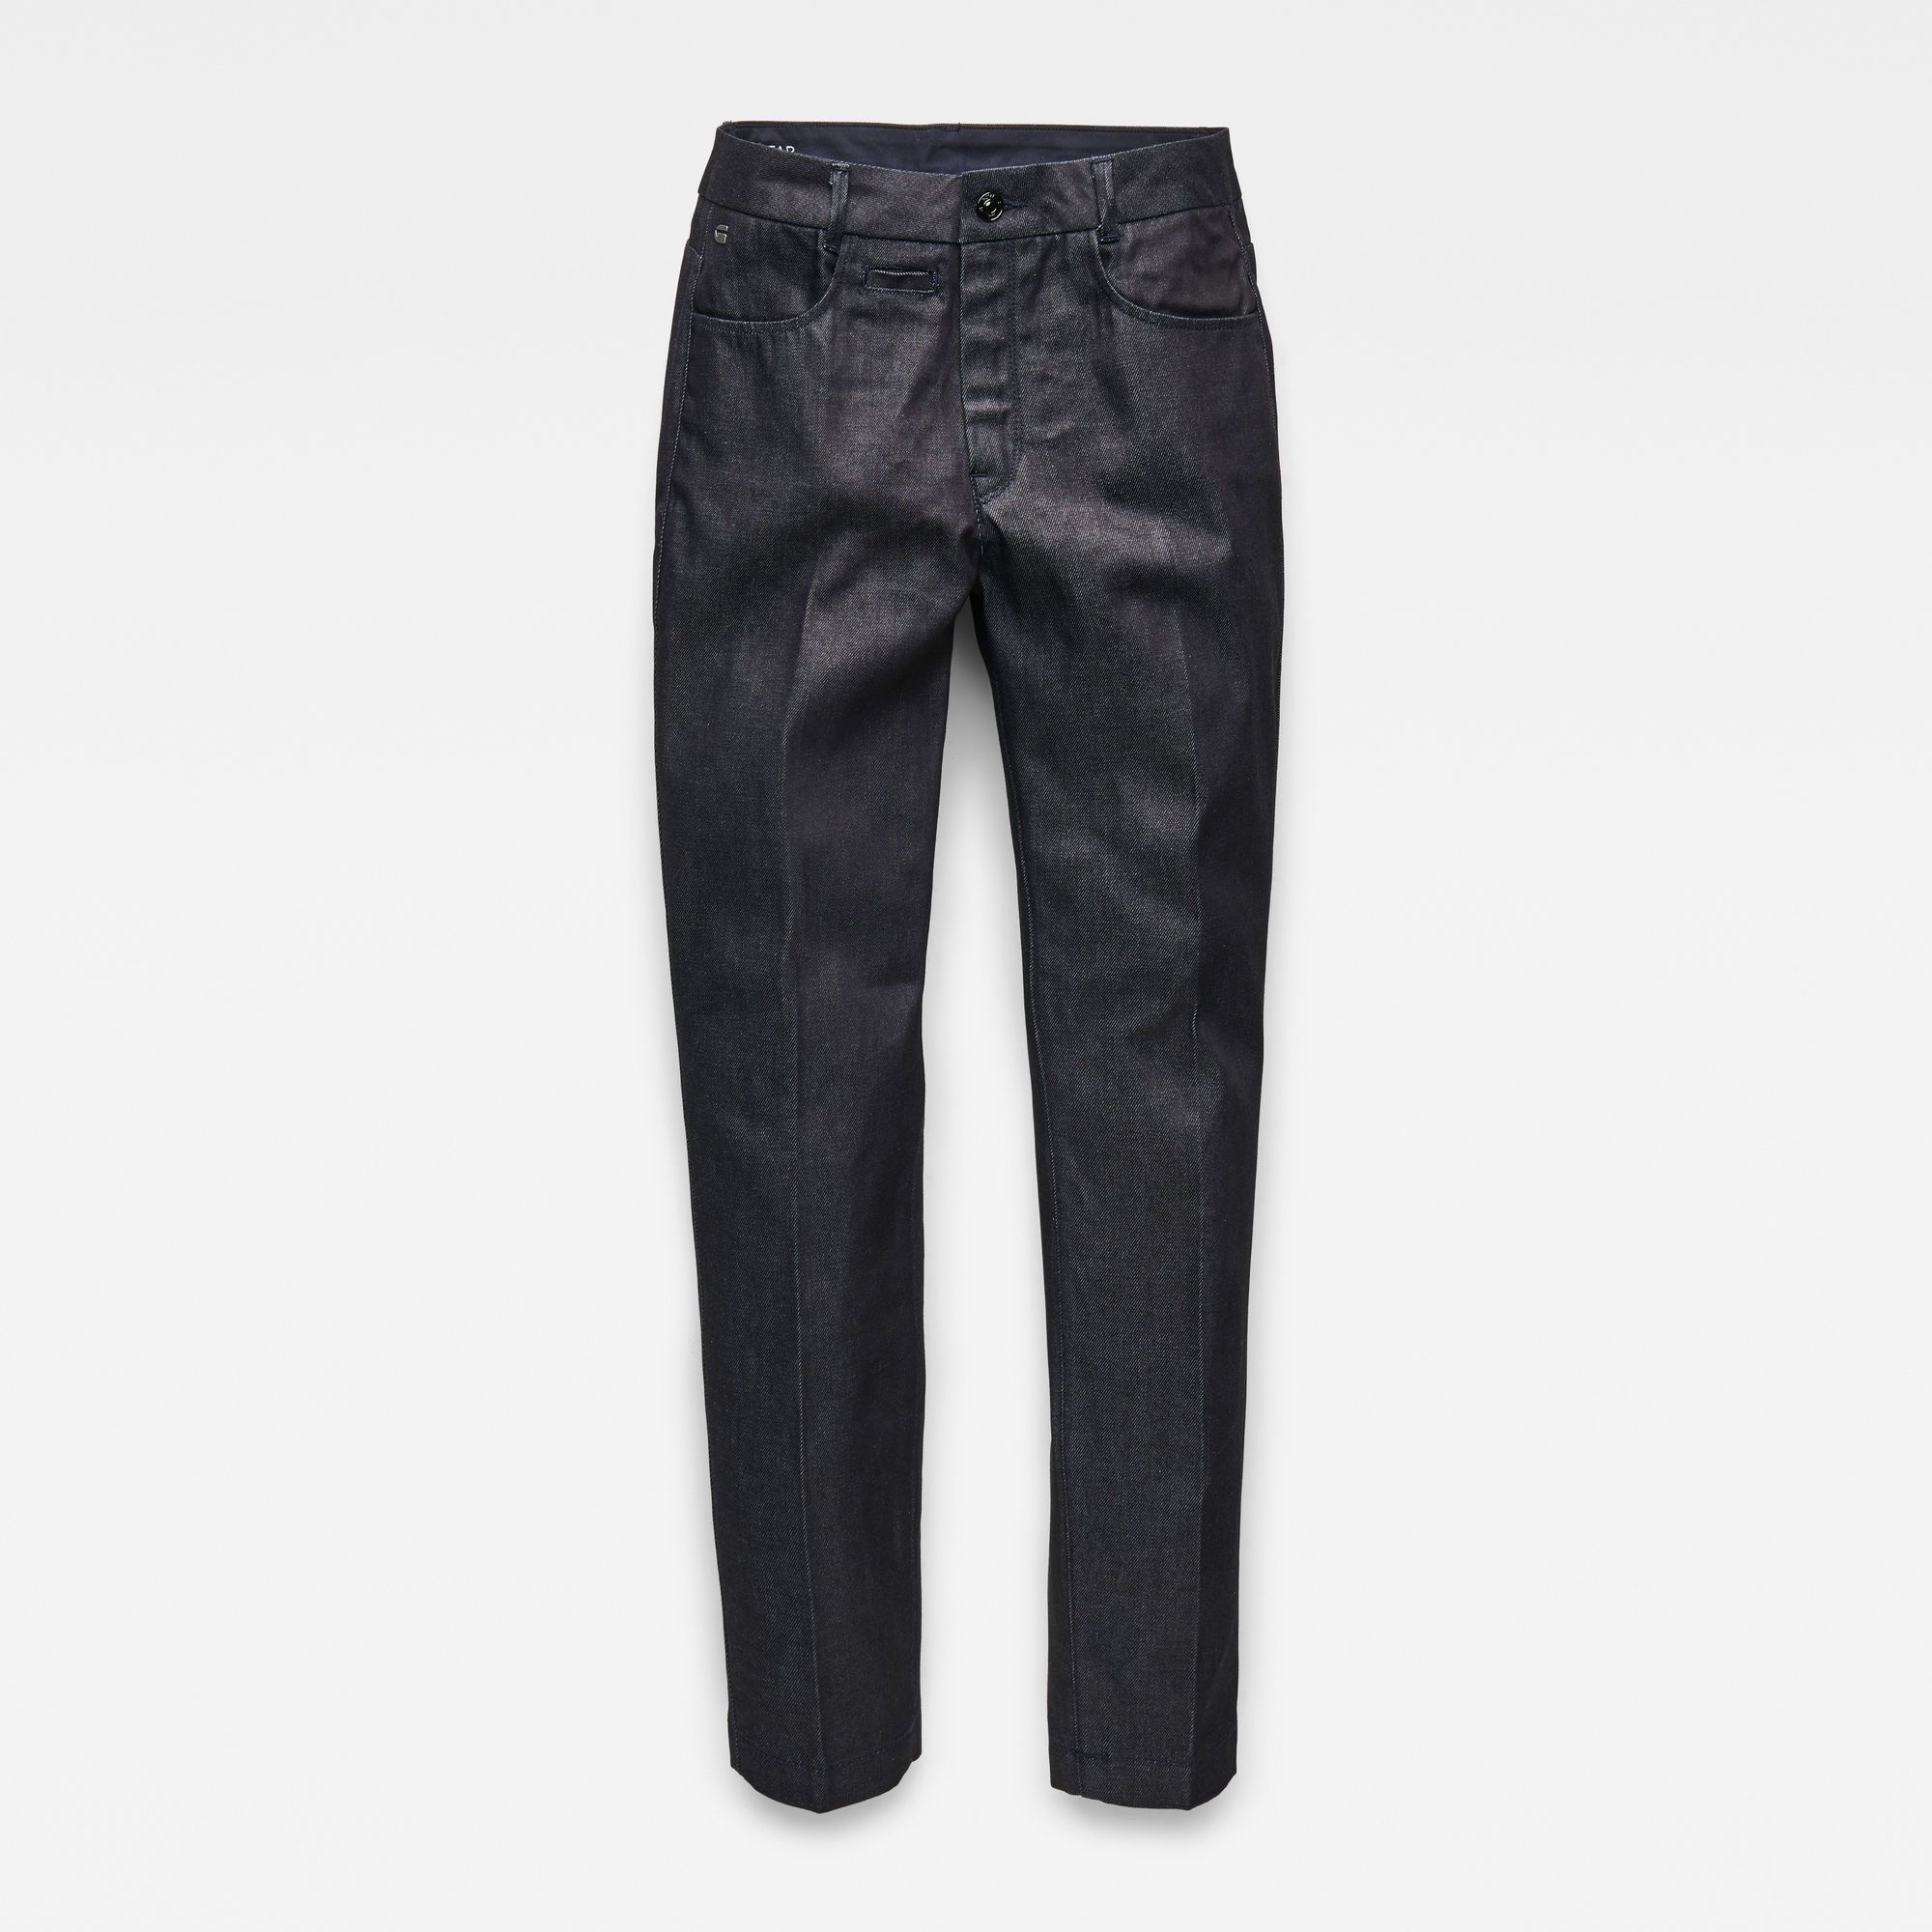 Mid waist. Regular waistband. Narrow from thigh to hem. Zip fly. Zip & button closure. Mid waist. The D-Staq Mid-Waist Skinny Ankle Chino  is cut from full-bodied denim with a surprisingly light weight. Slubby, textured denim. Super-soft hand-feel. 11-dip indigo. Skinny